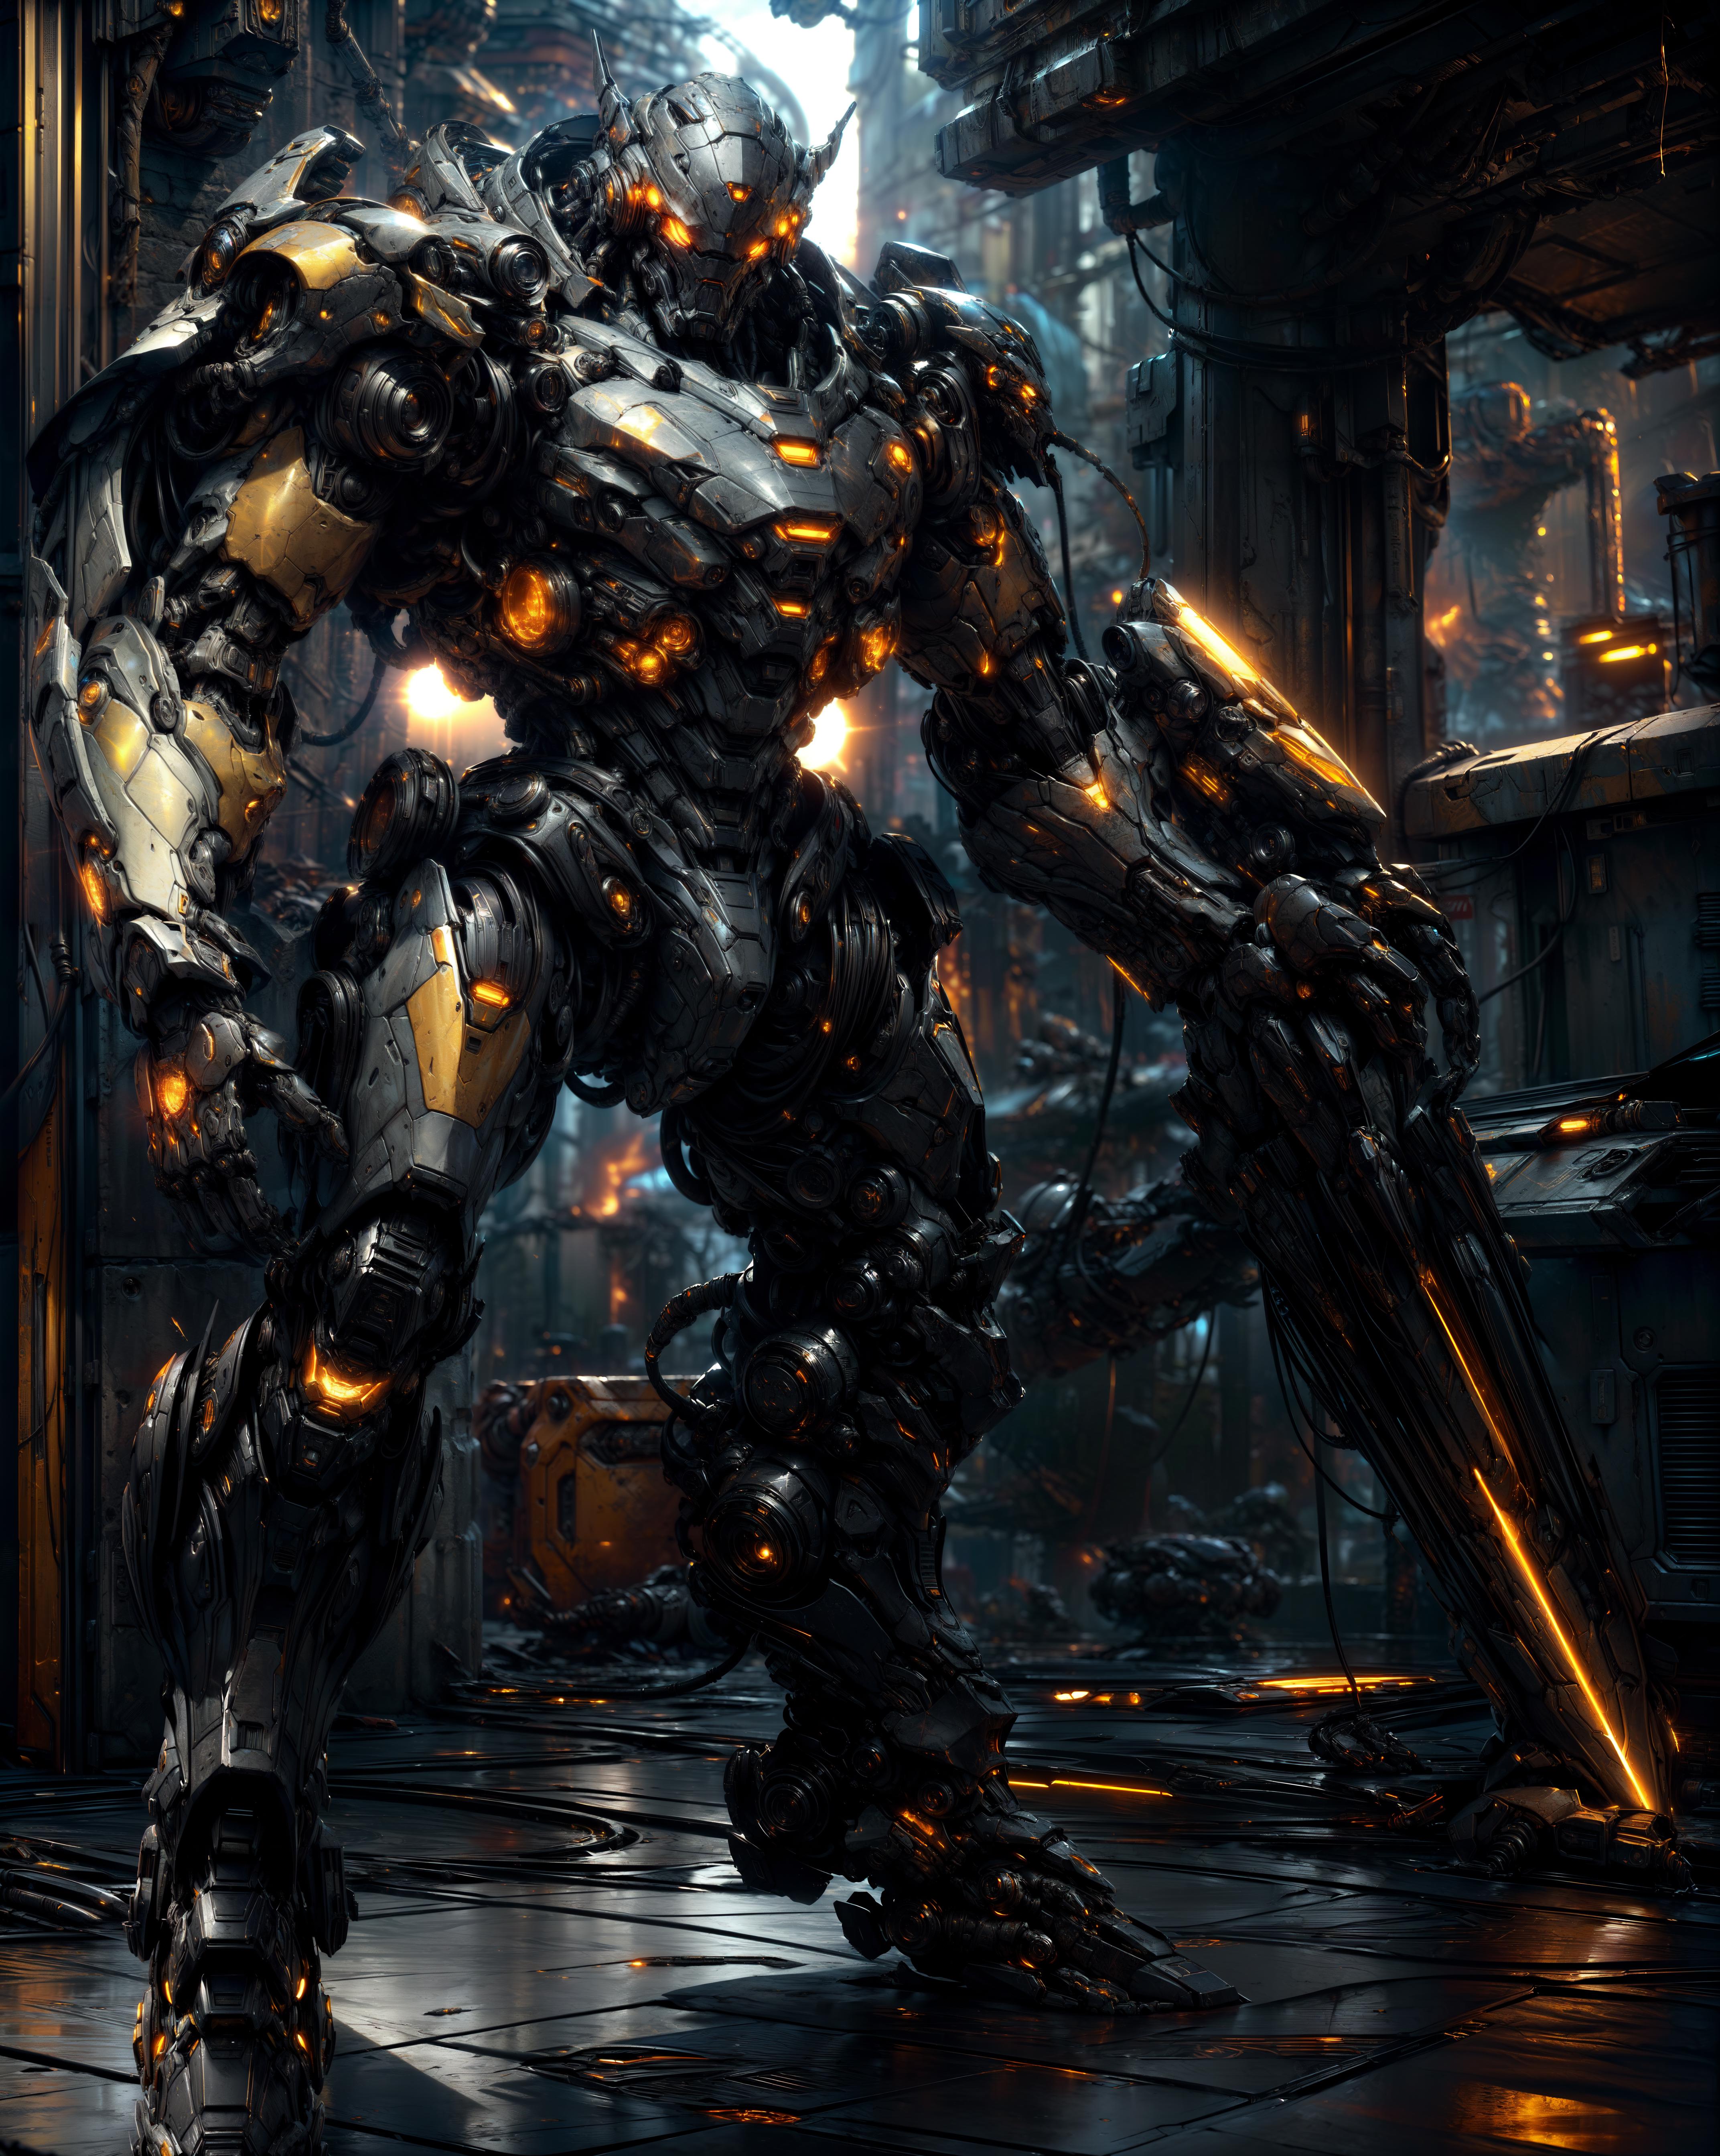 A robot with a sword and shield, standing in a city surrounded by a maze of wires.